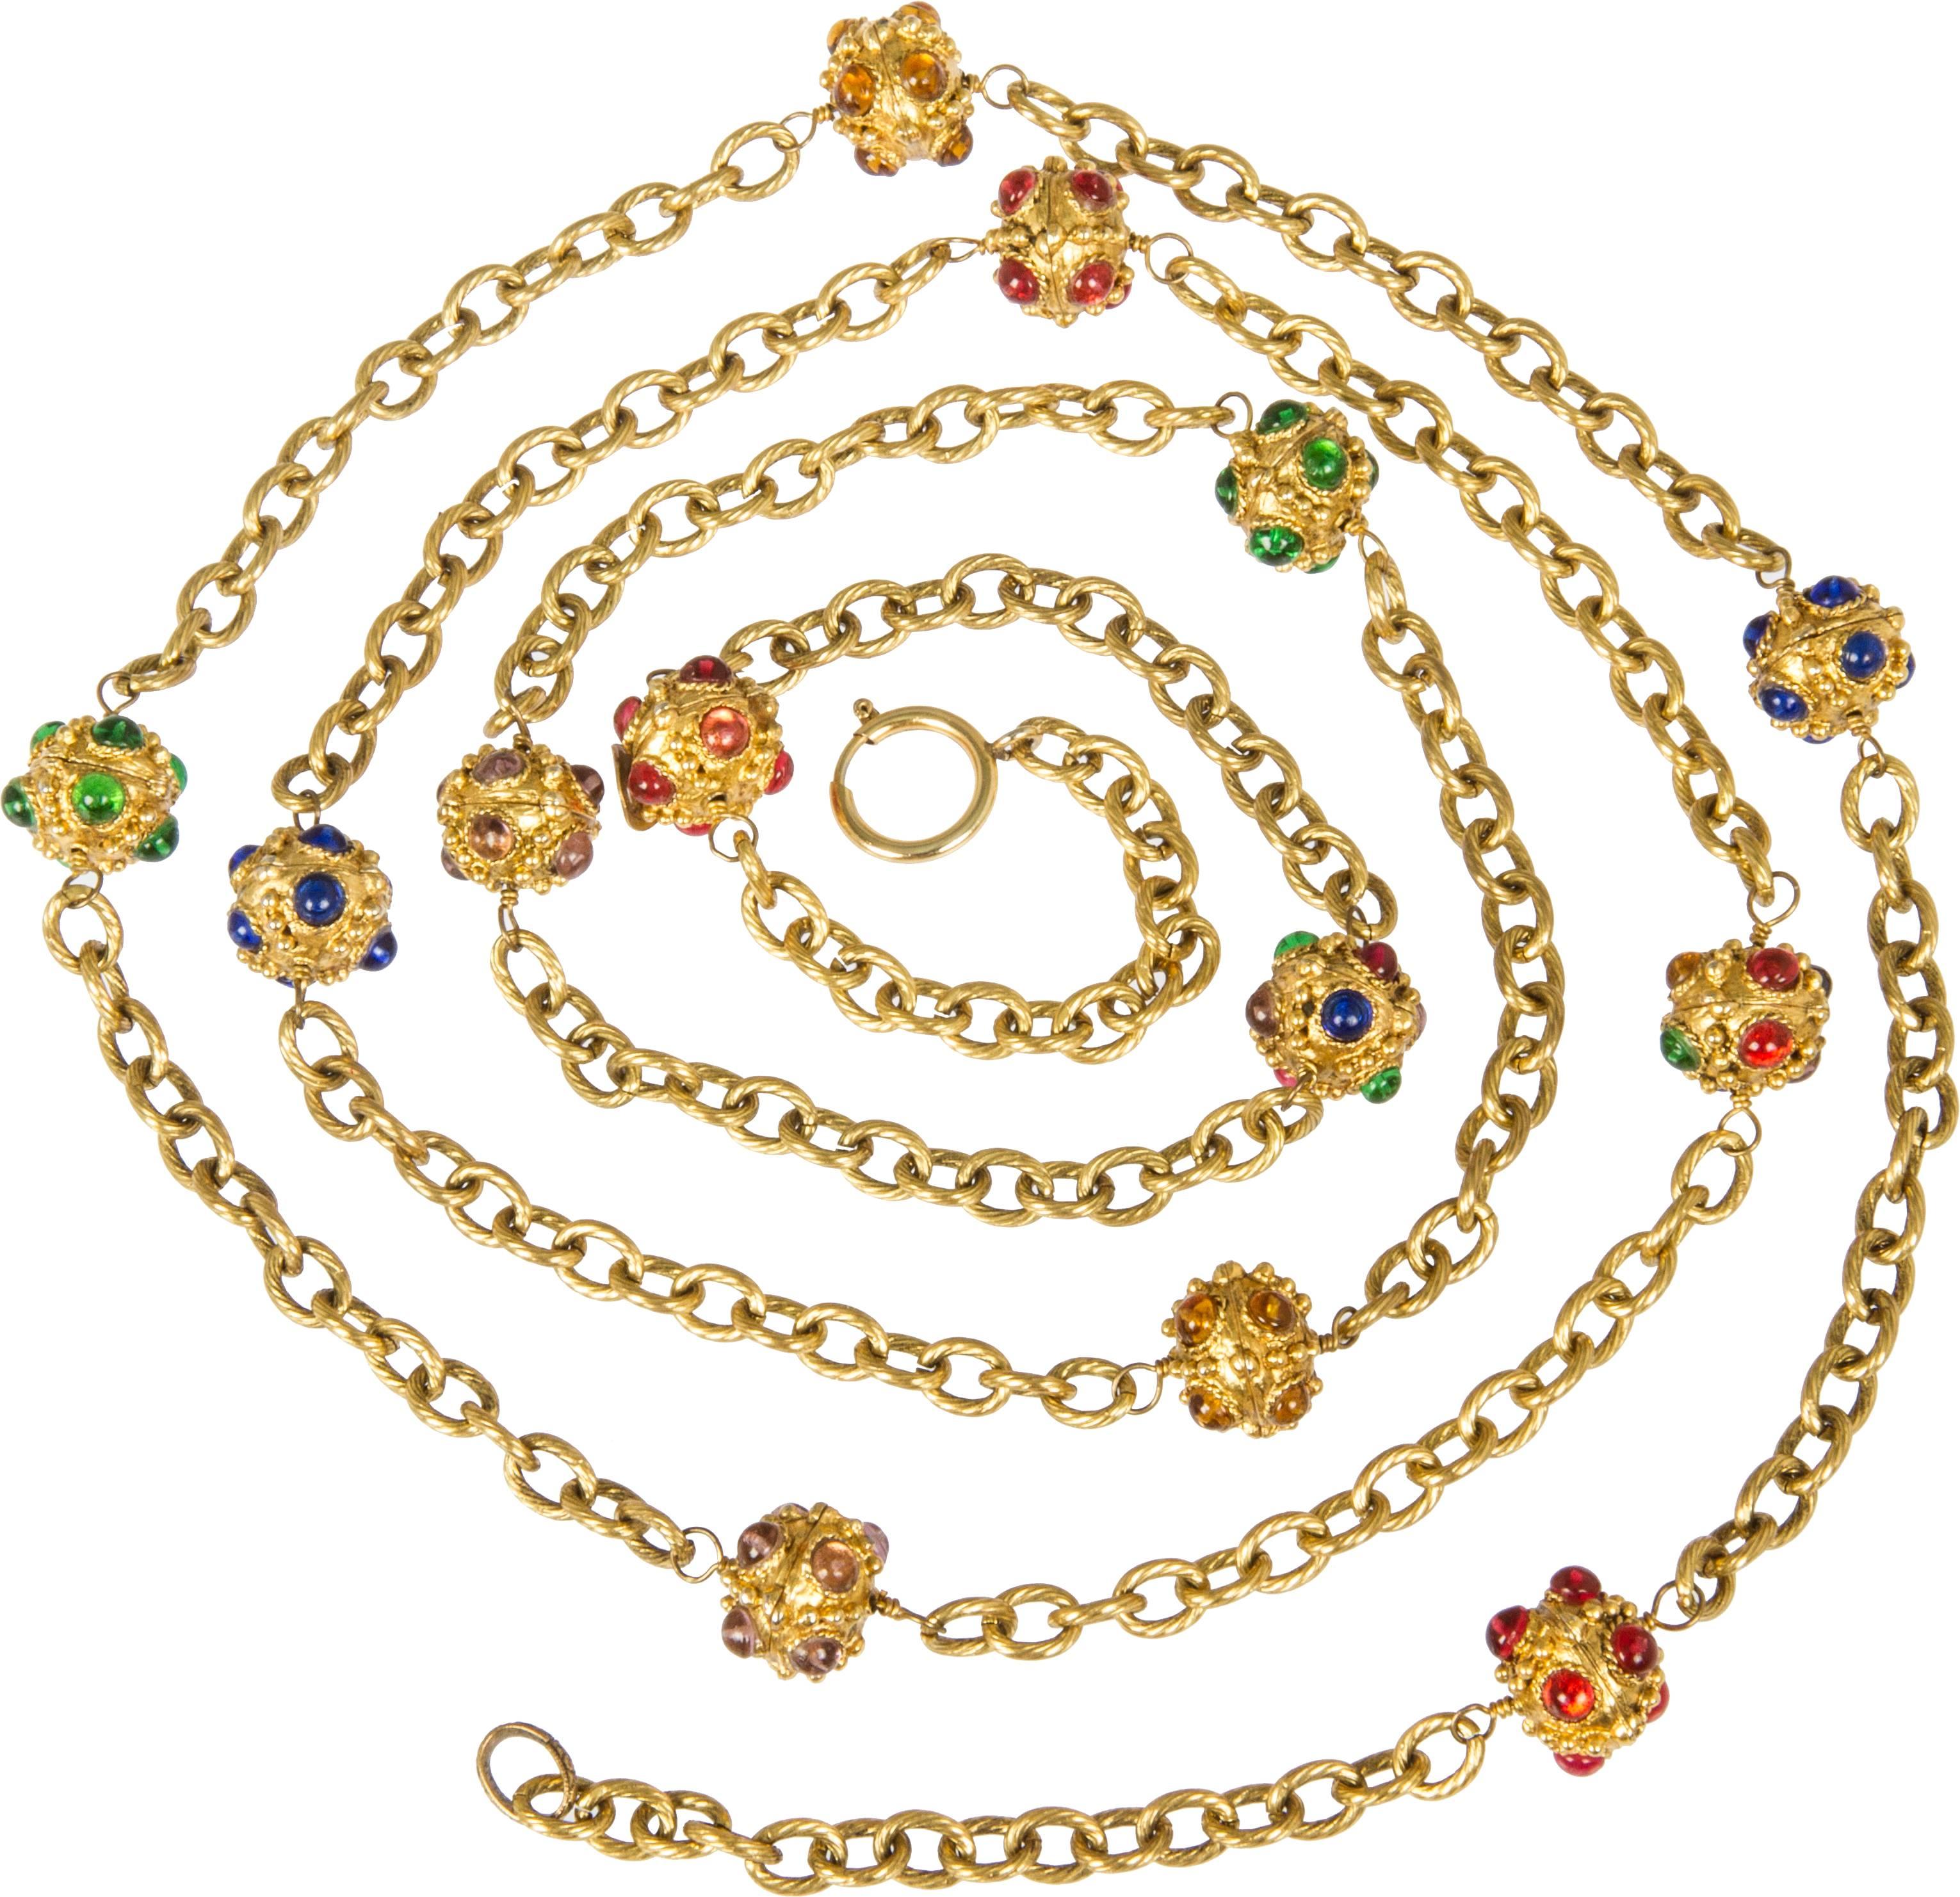 Women's Long Chanel Necklace with Cabochon Encrusted Orbs